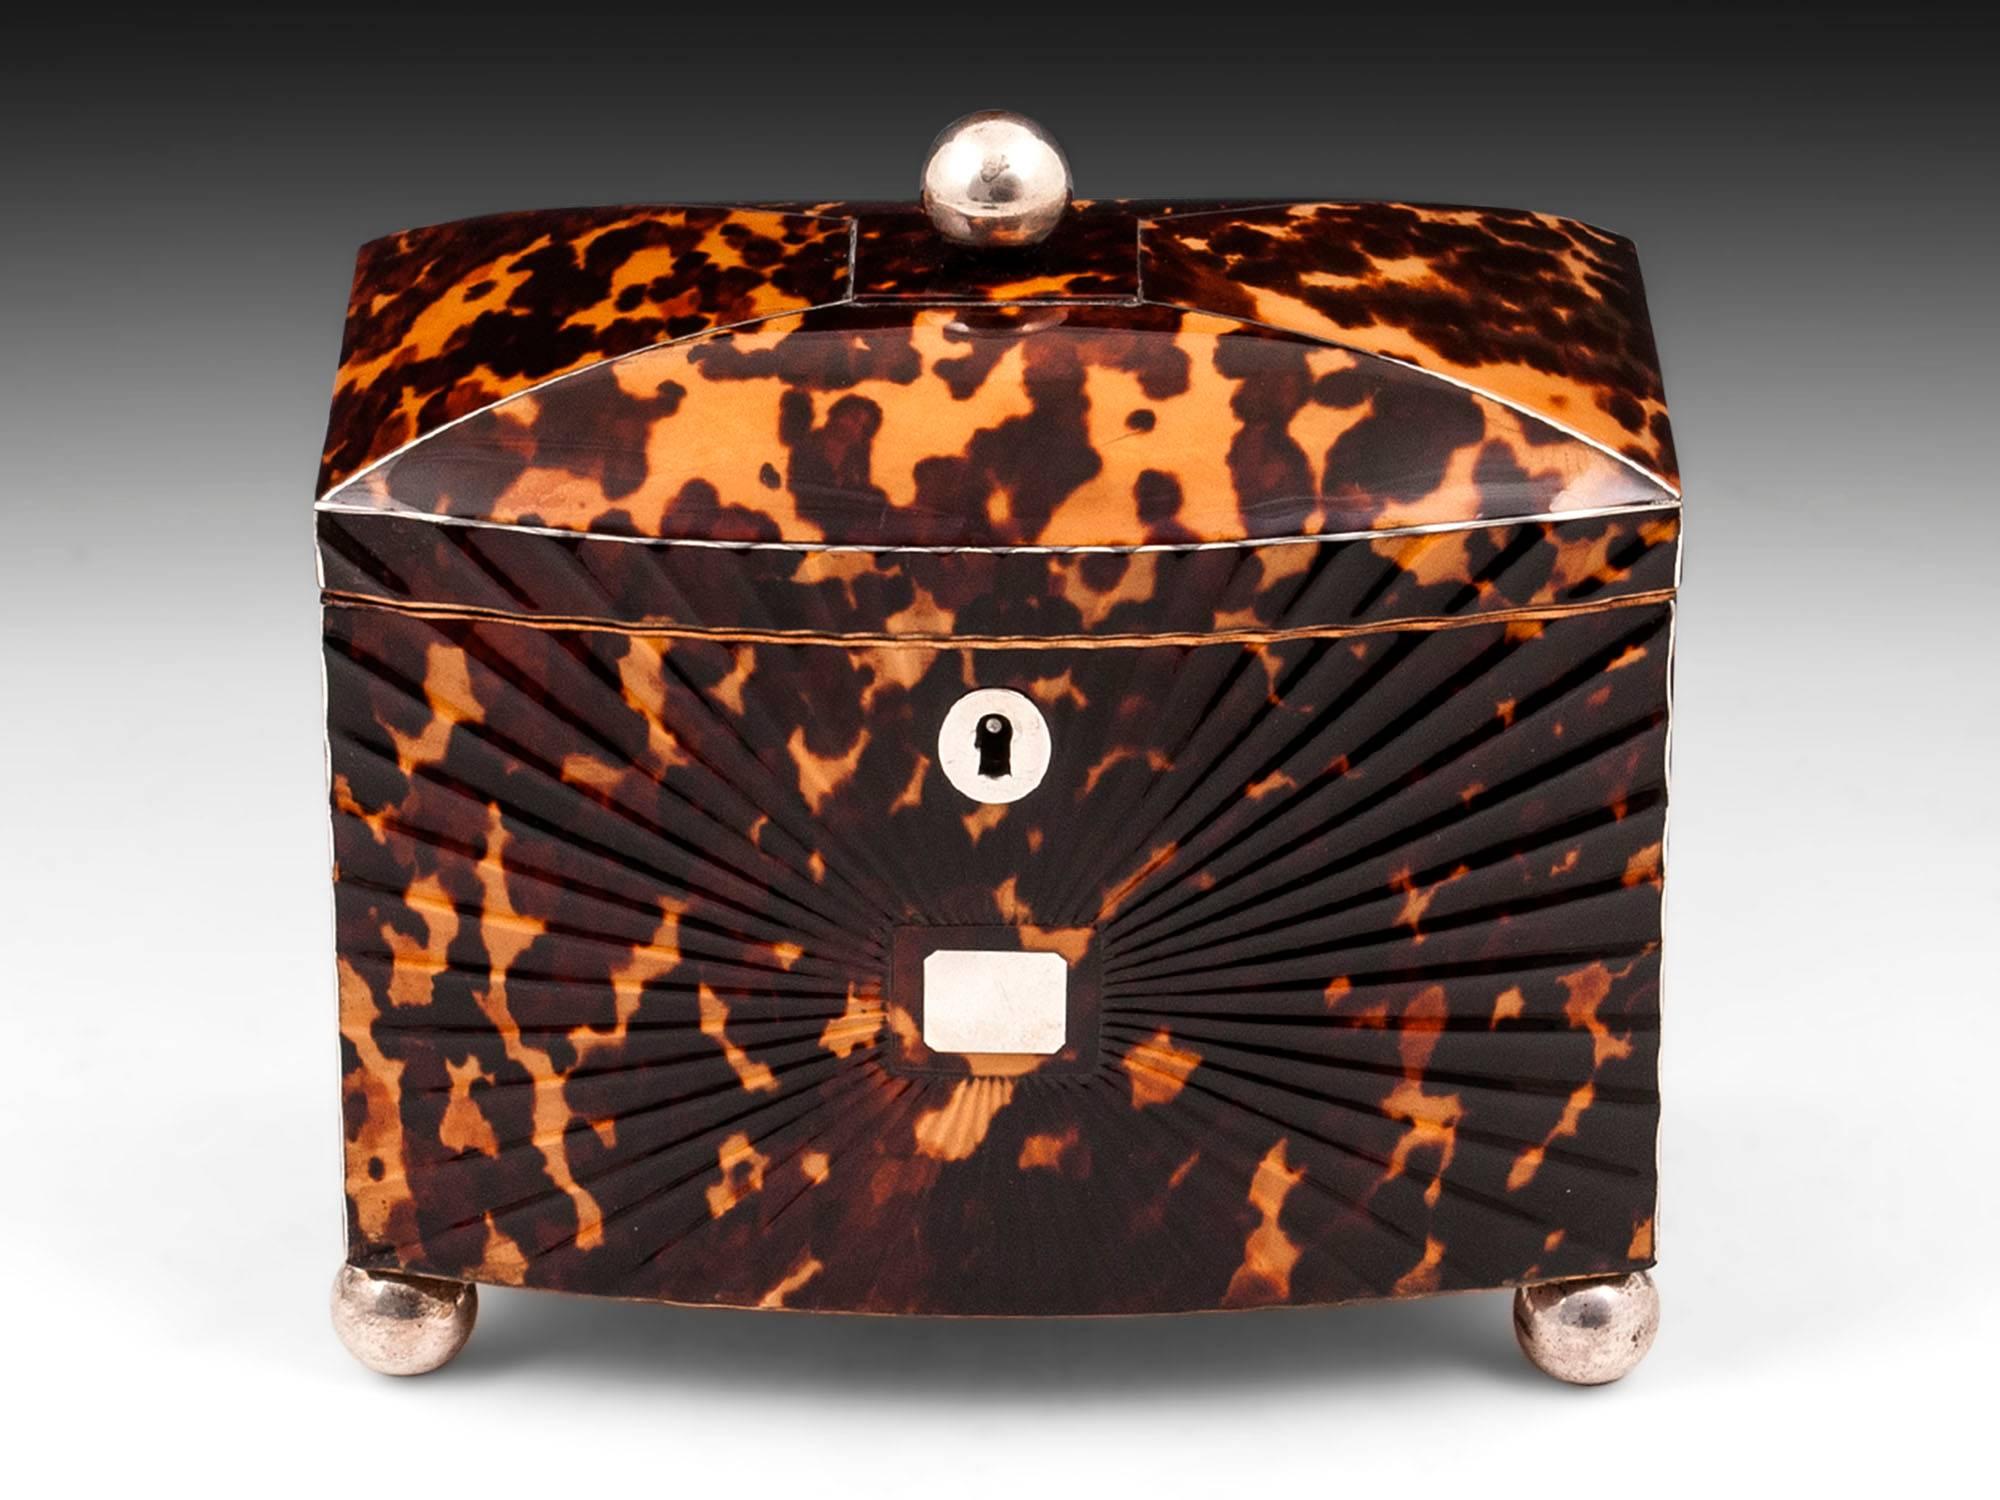 Stunning Regency starburst pressed bow fronted Tortoiseshell tea caddy, with silver initial plate to the centre of the star burst front and silver plated ball feet and finial and silver ball feet.

The interior lid has a purple silk lid with the